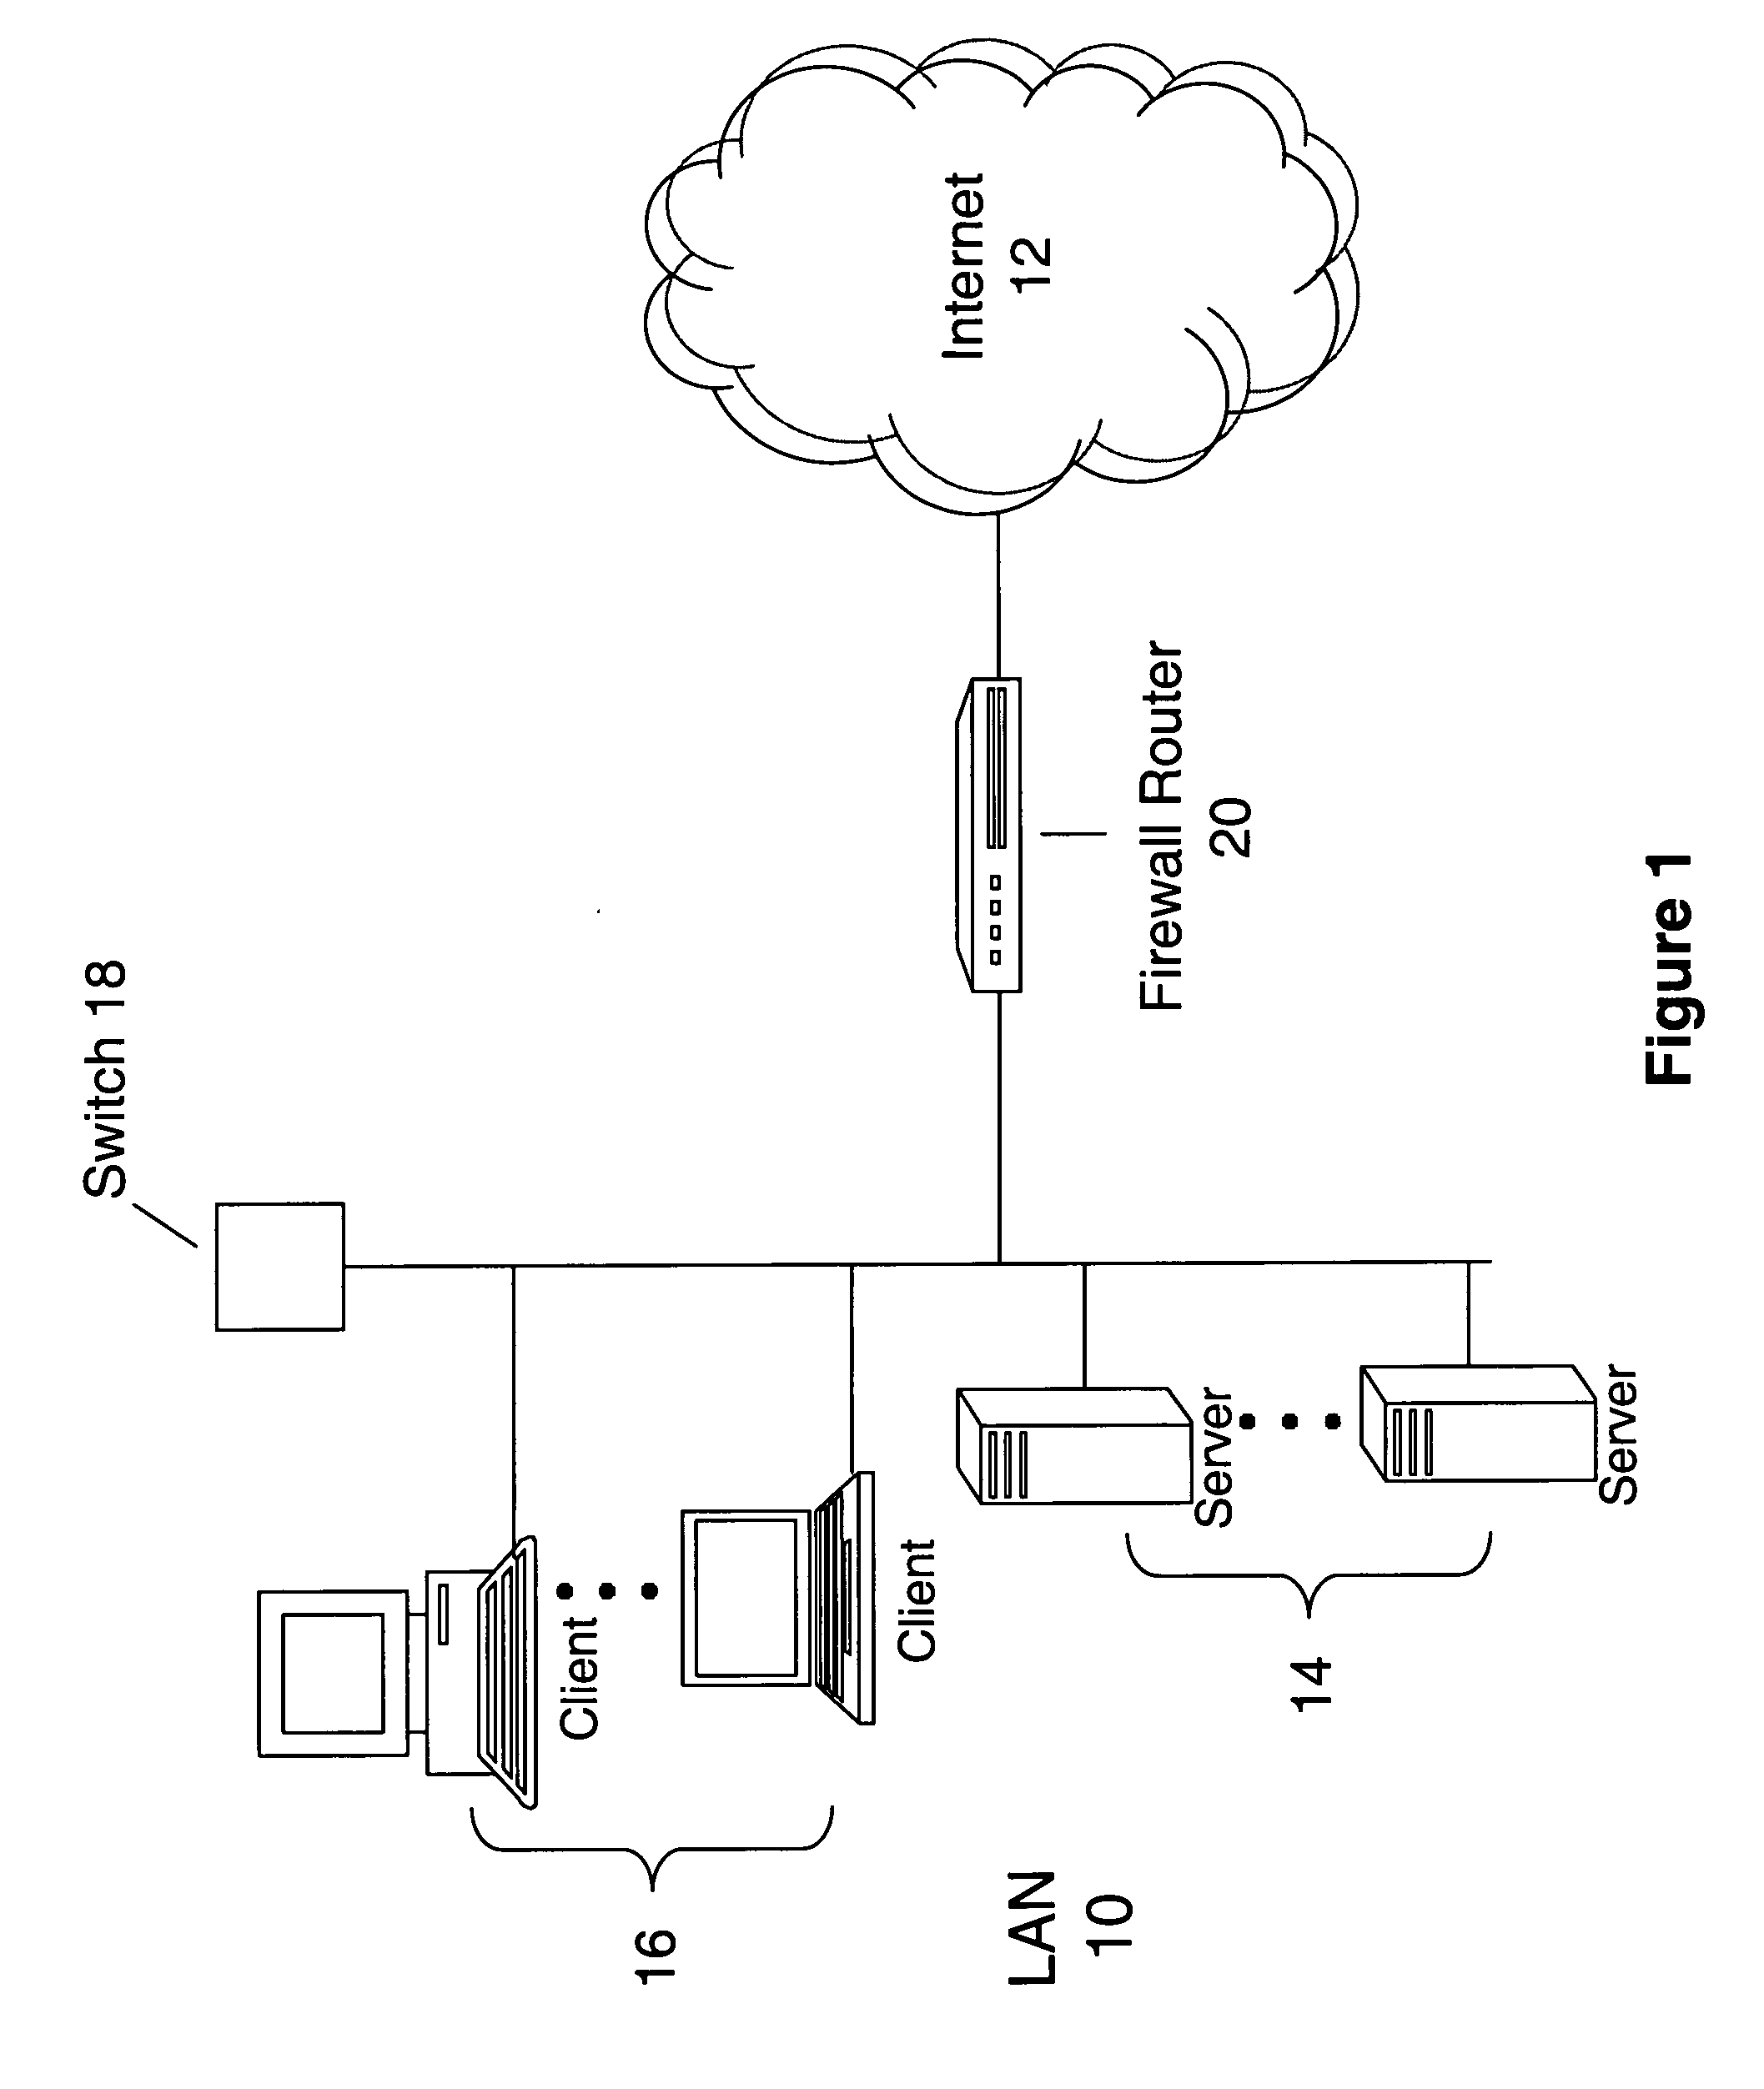 Identifying image type in a capture system